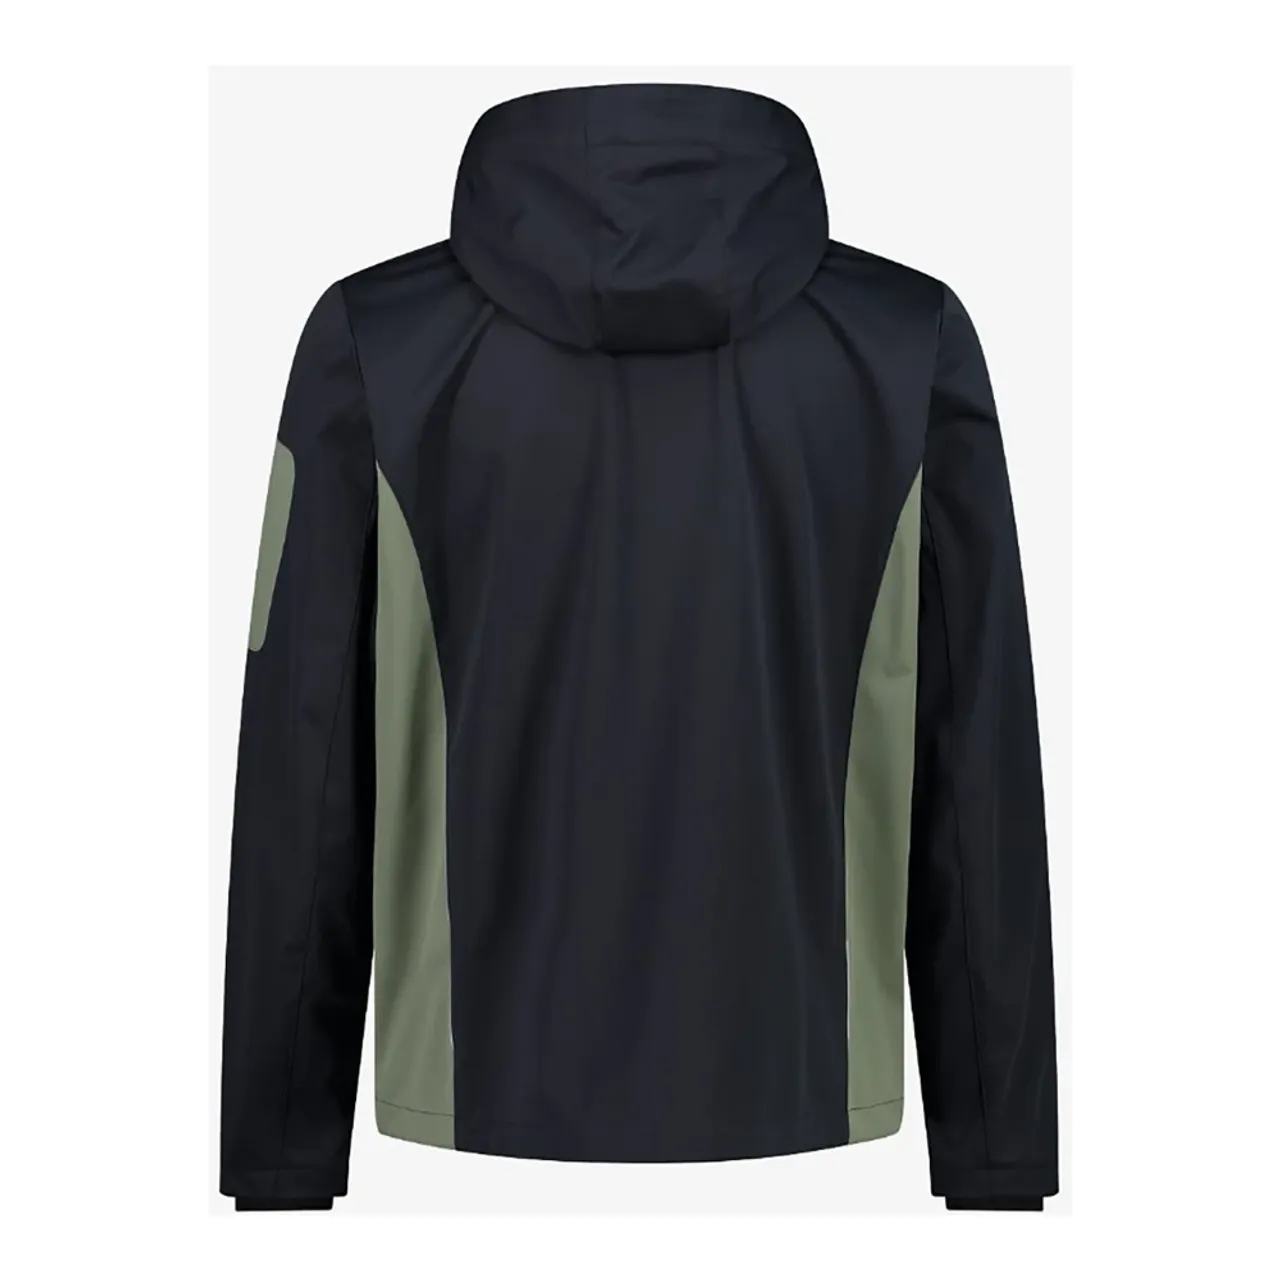 CMP , Softshell Hooded Jacket with Clima Protect ,Black male, Sizes: